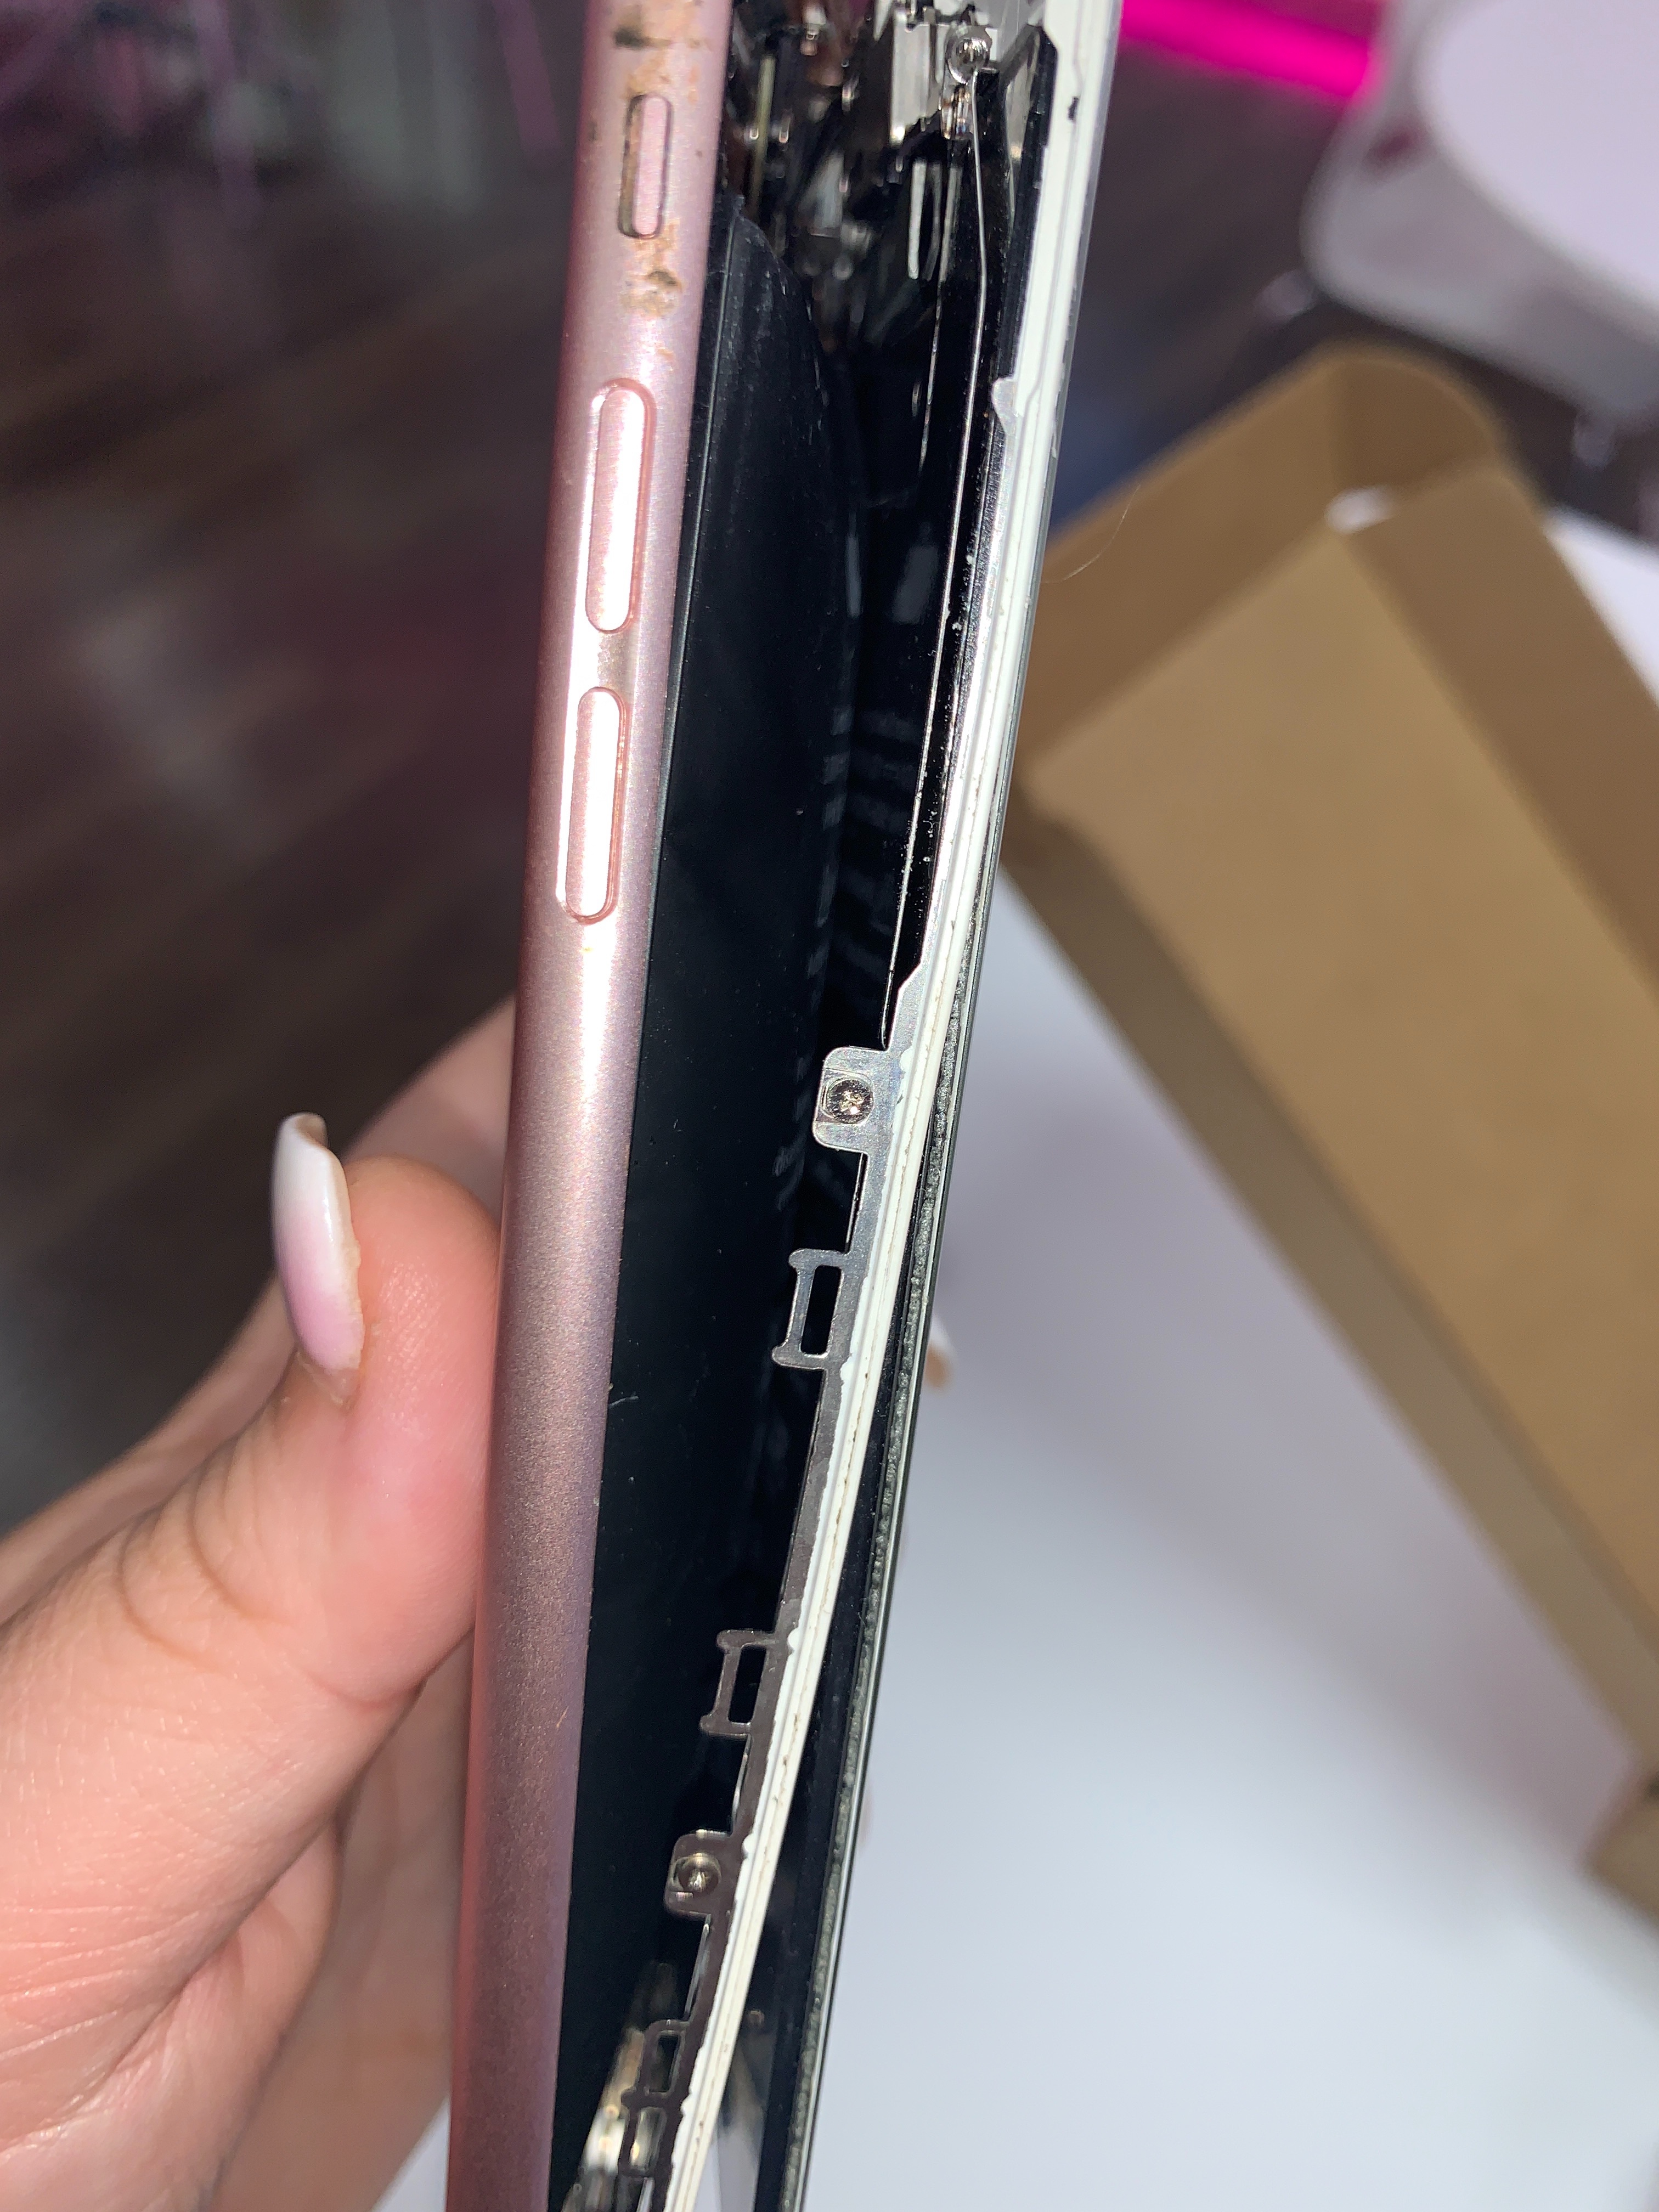 iPhone 6s Plus battery swelled and broke … - Community